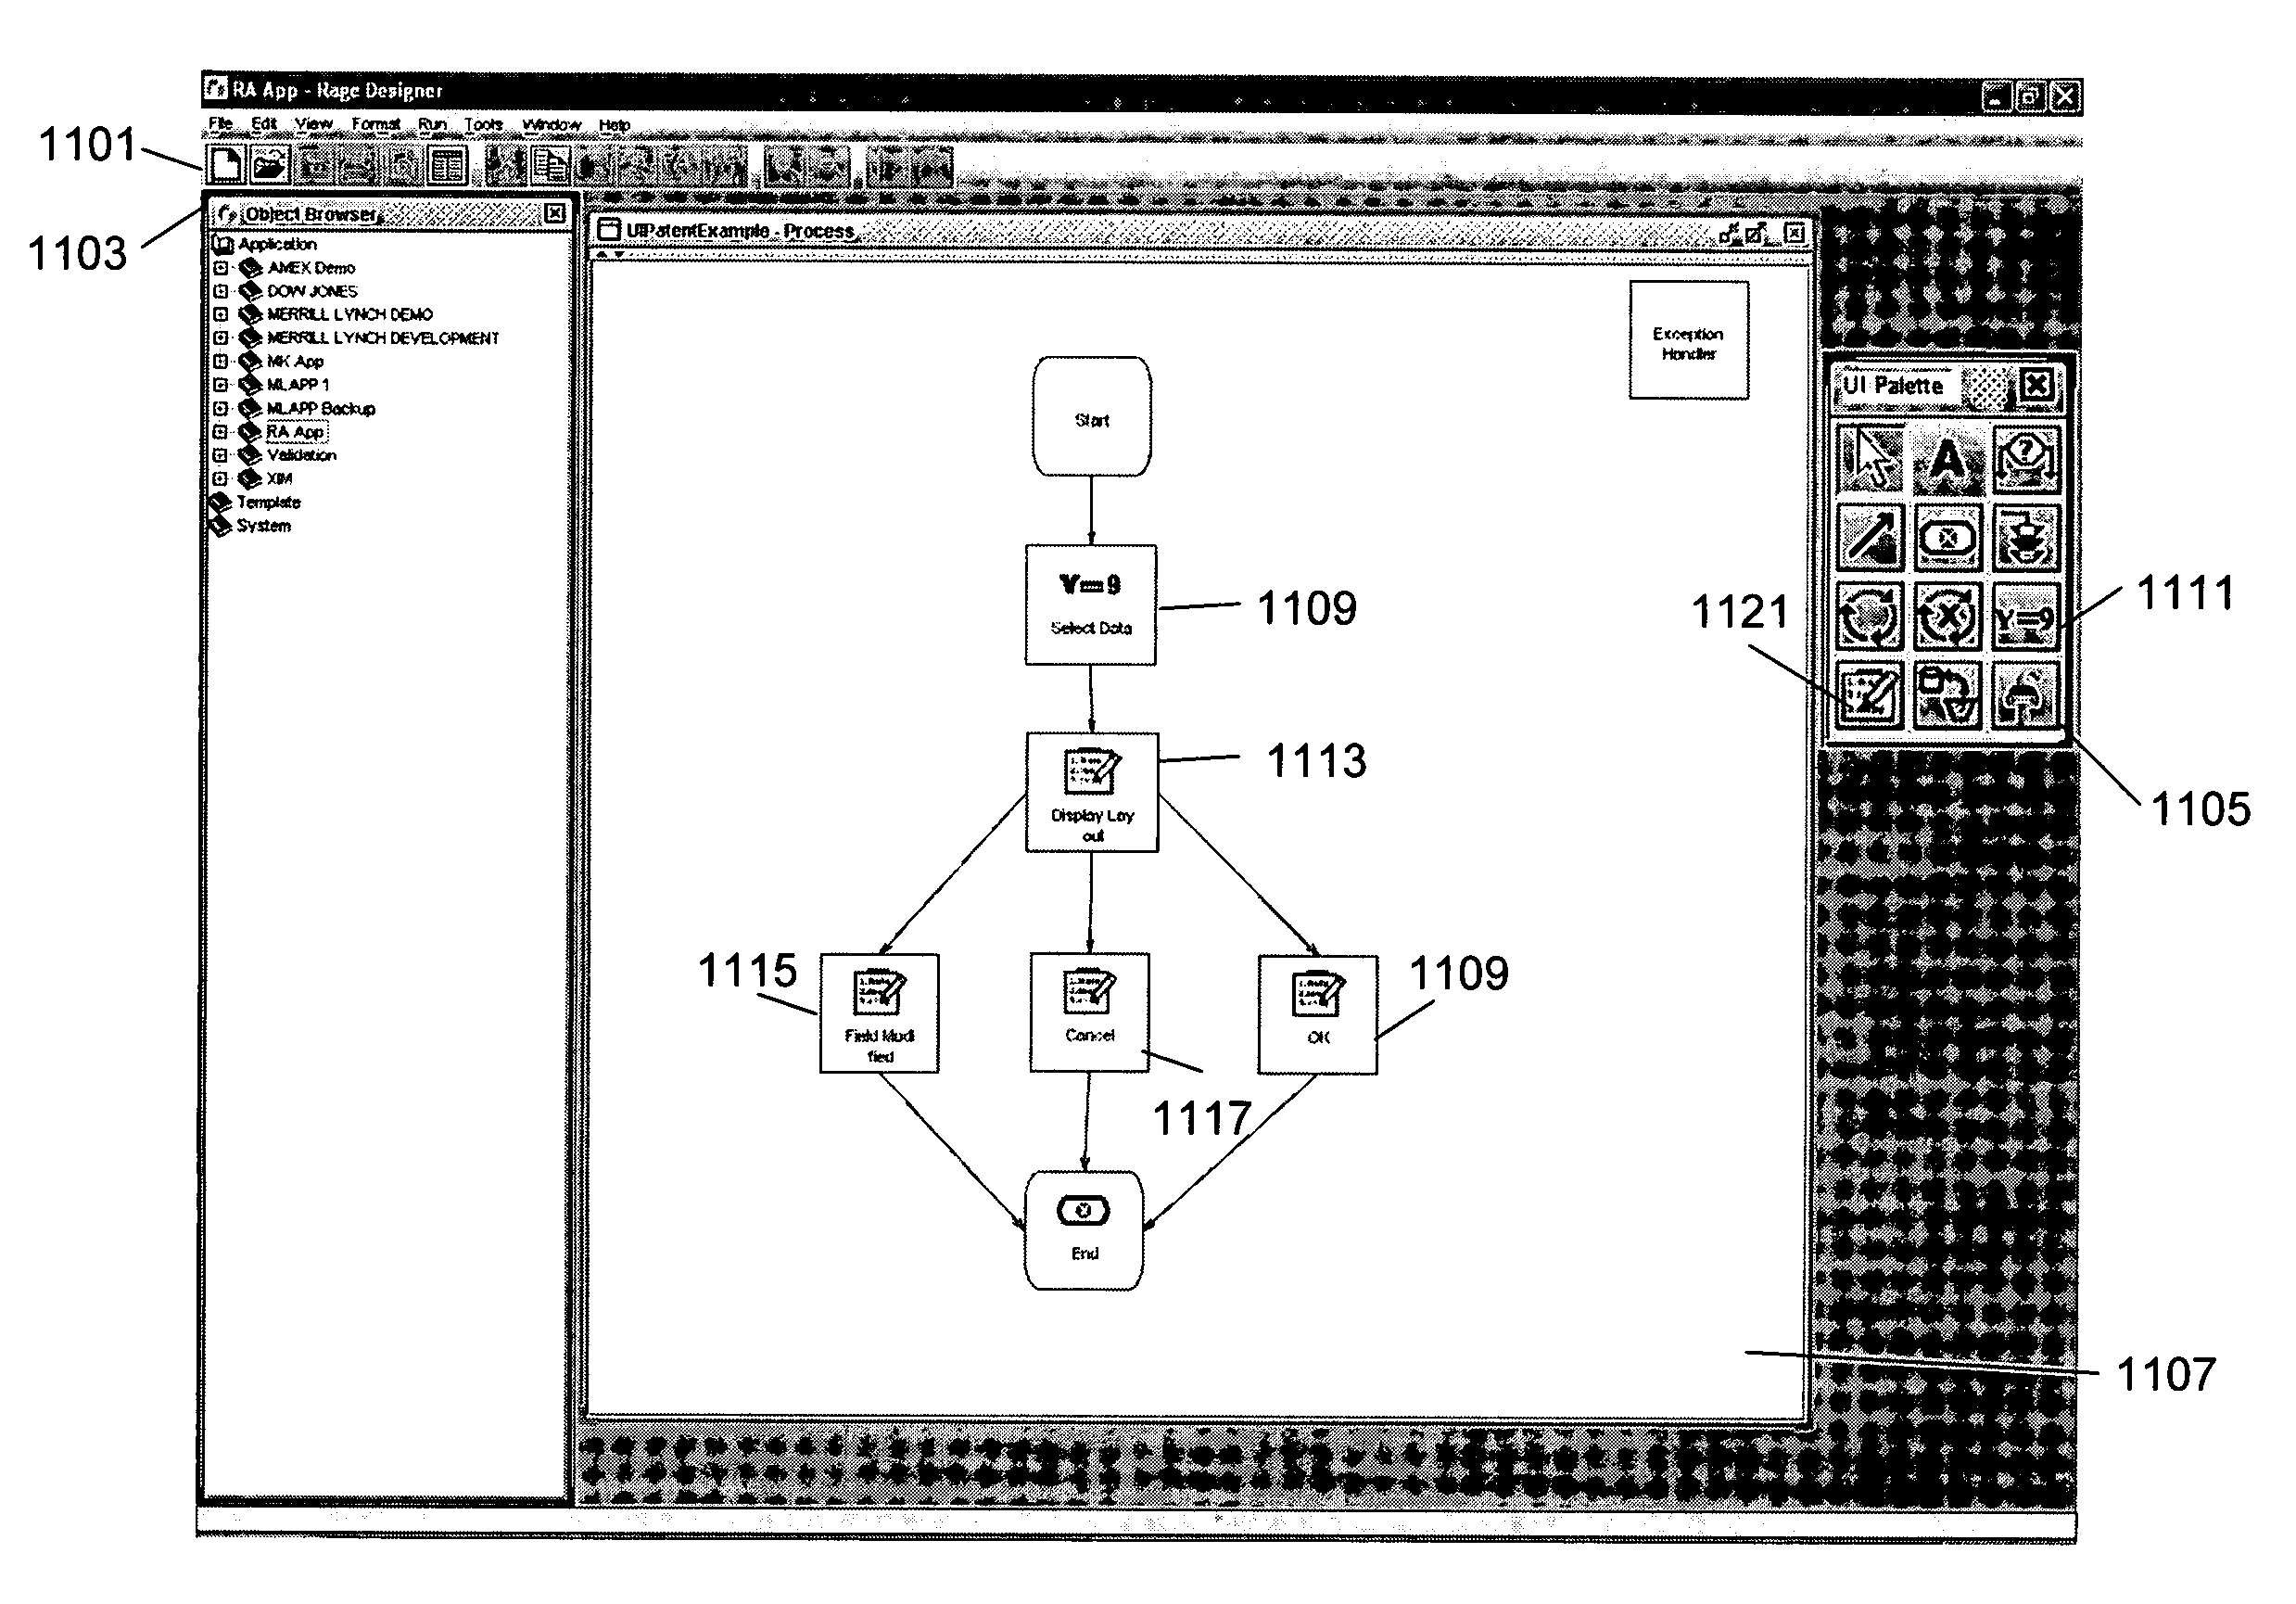 System and method for developing user interfaces purely by modeling as meta data in software application